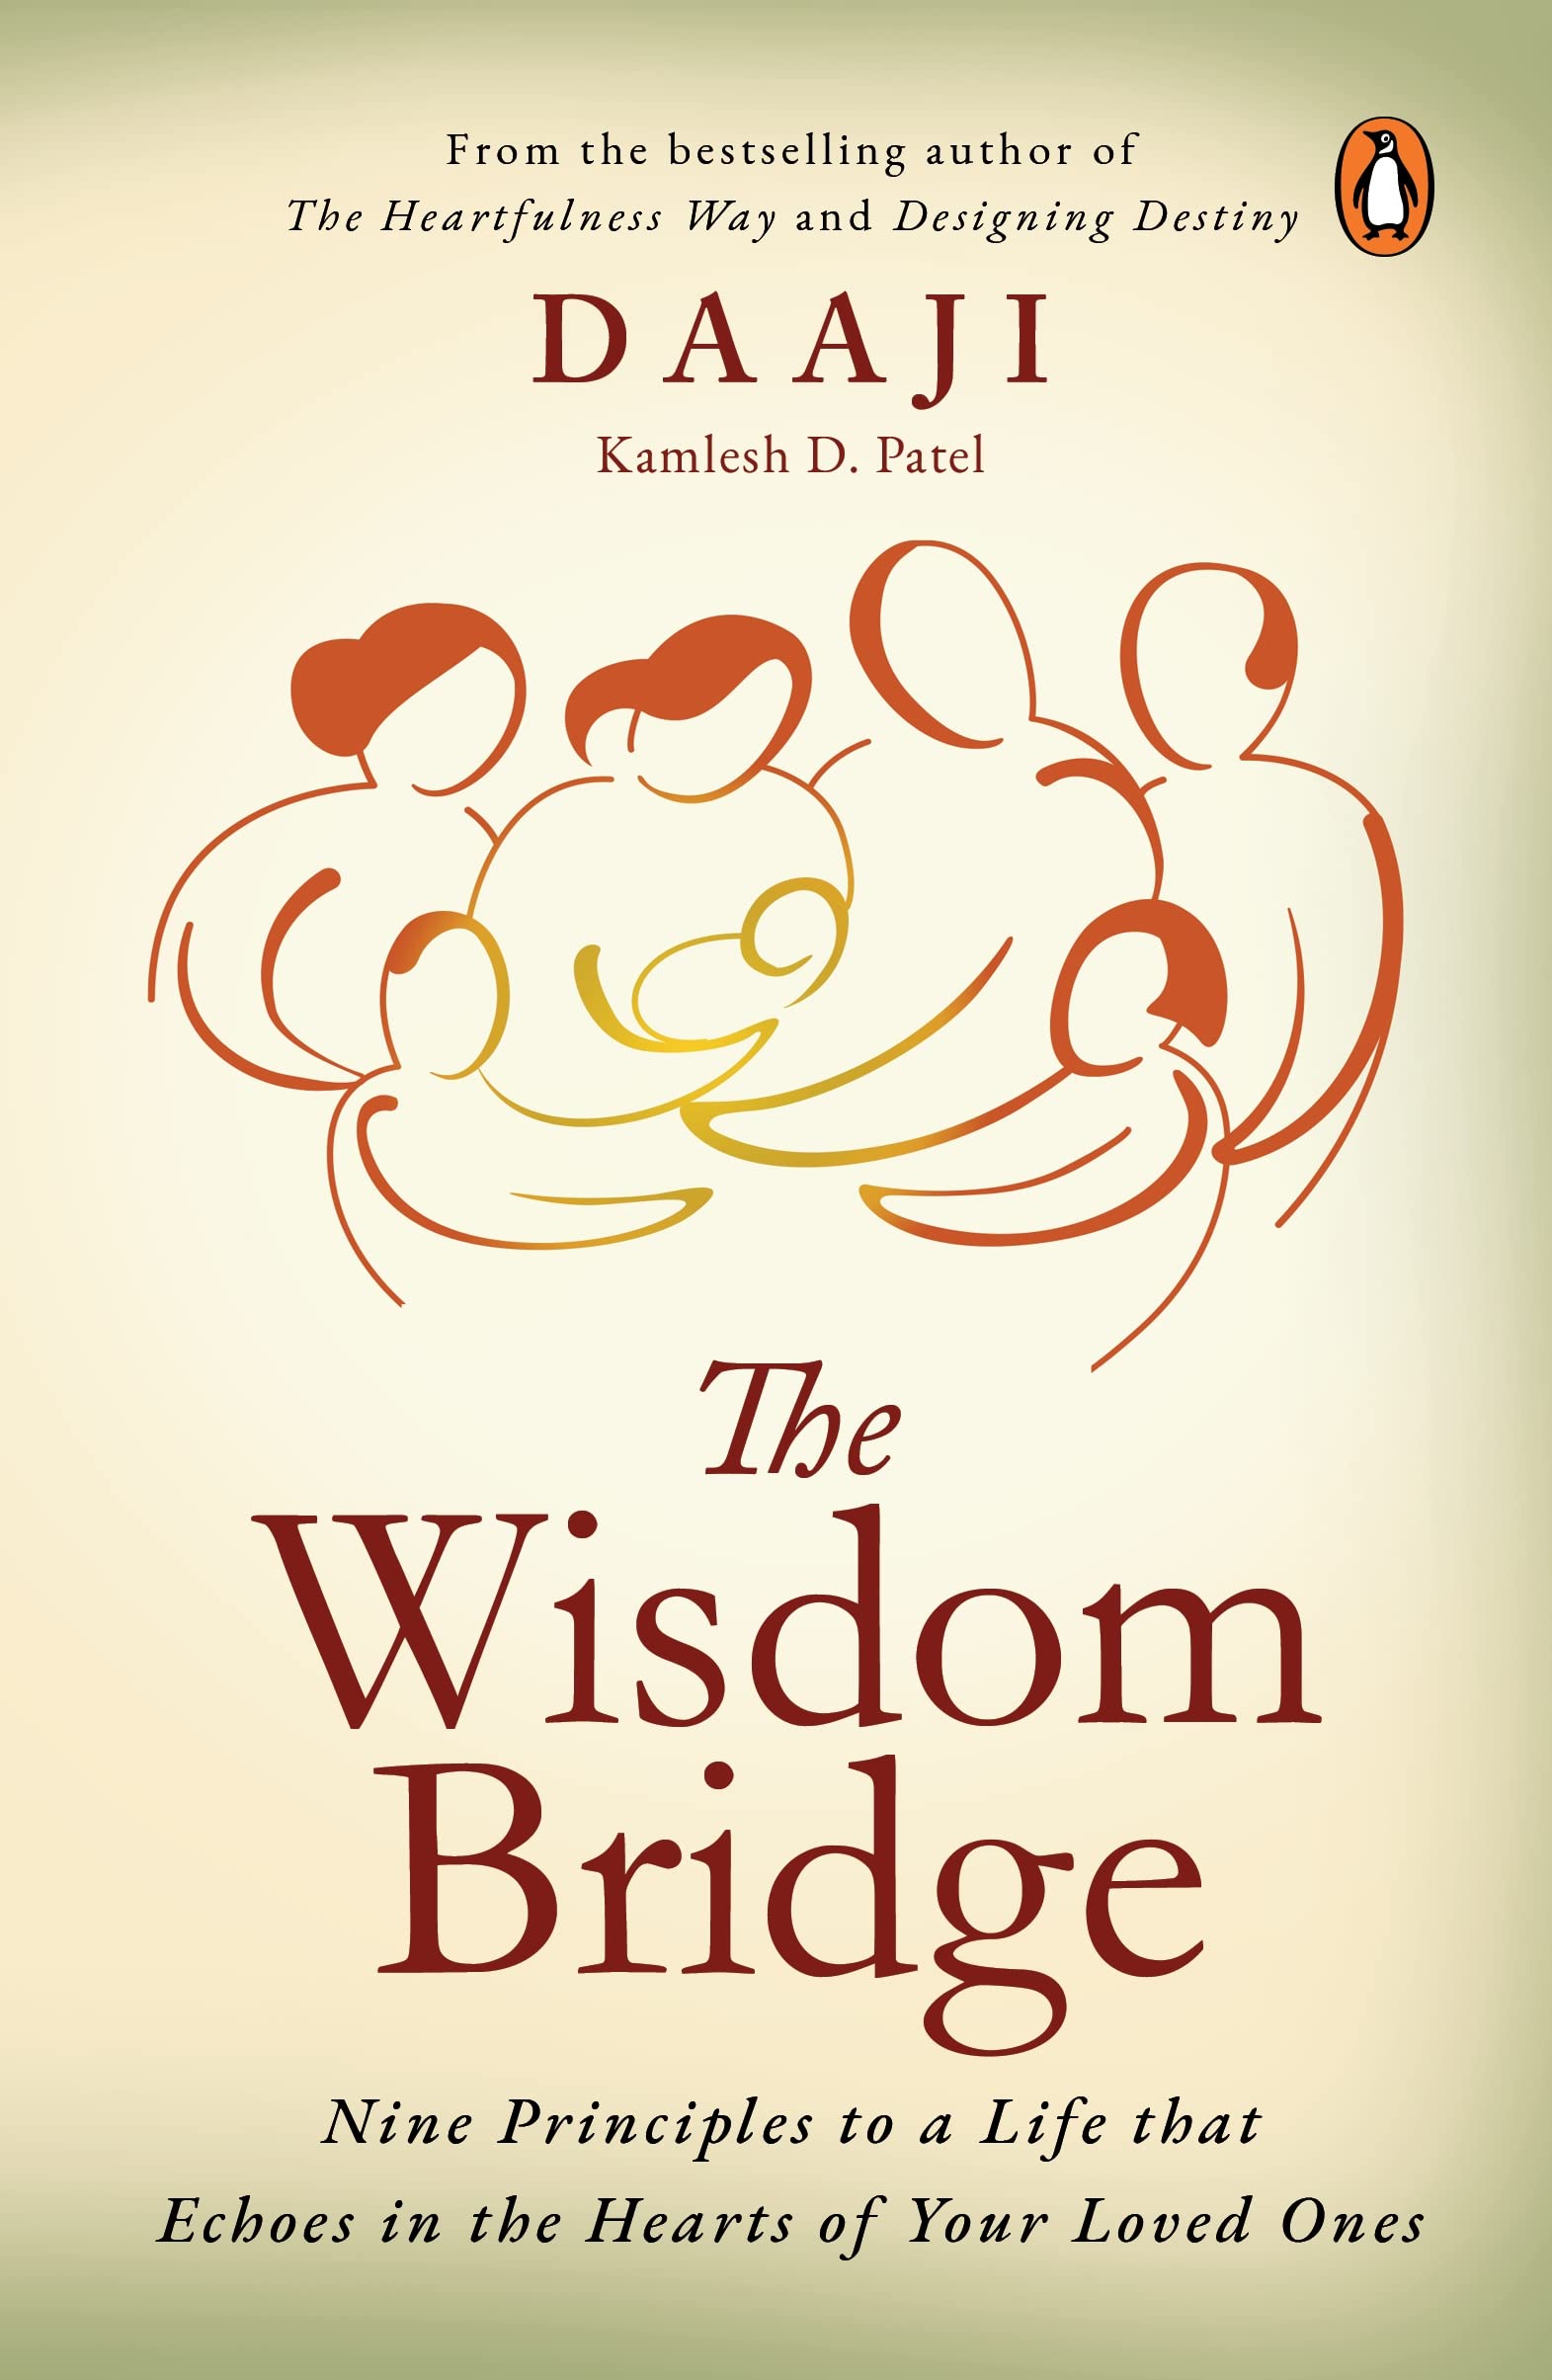 "The Wisdom Bridge" by Daaji is the perfect guide to stress-free parenting and raising resilient children and happy families